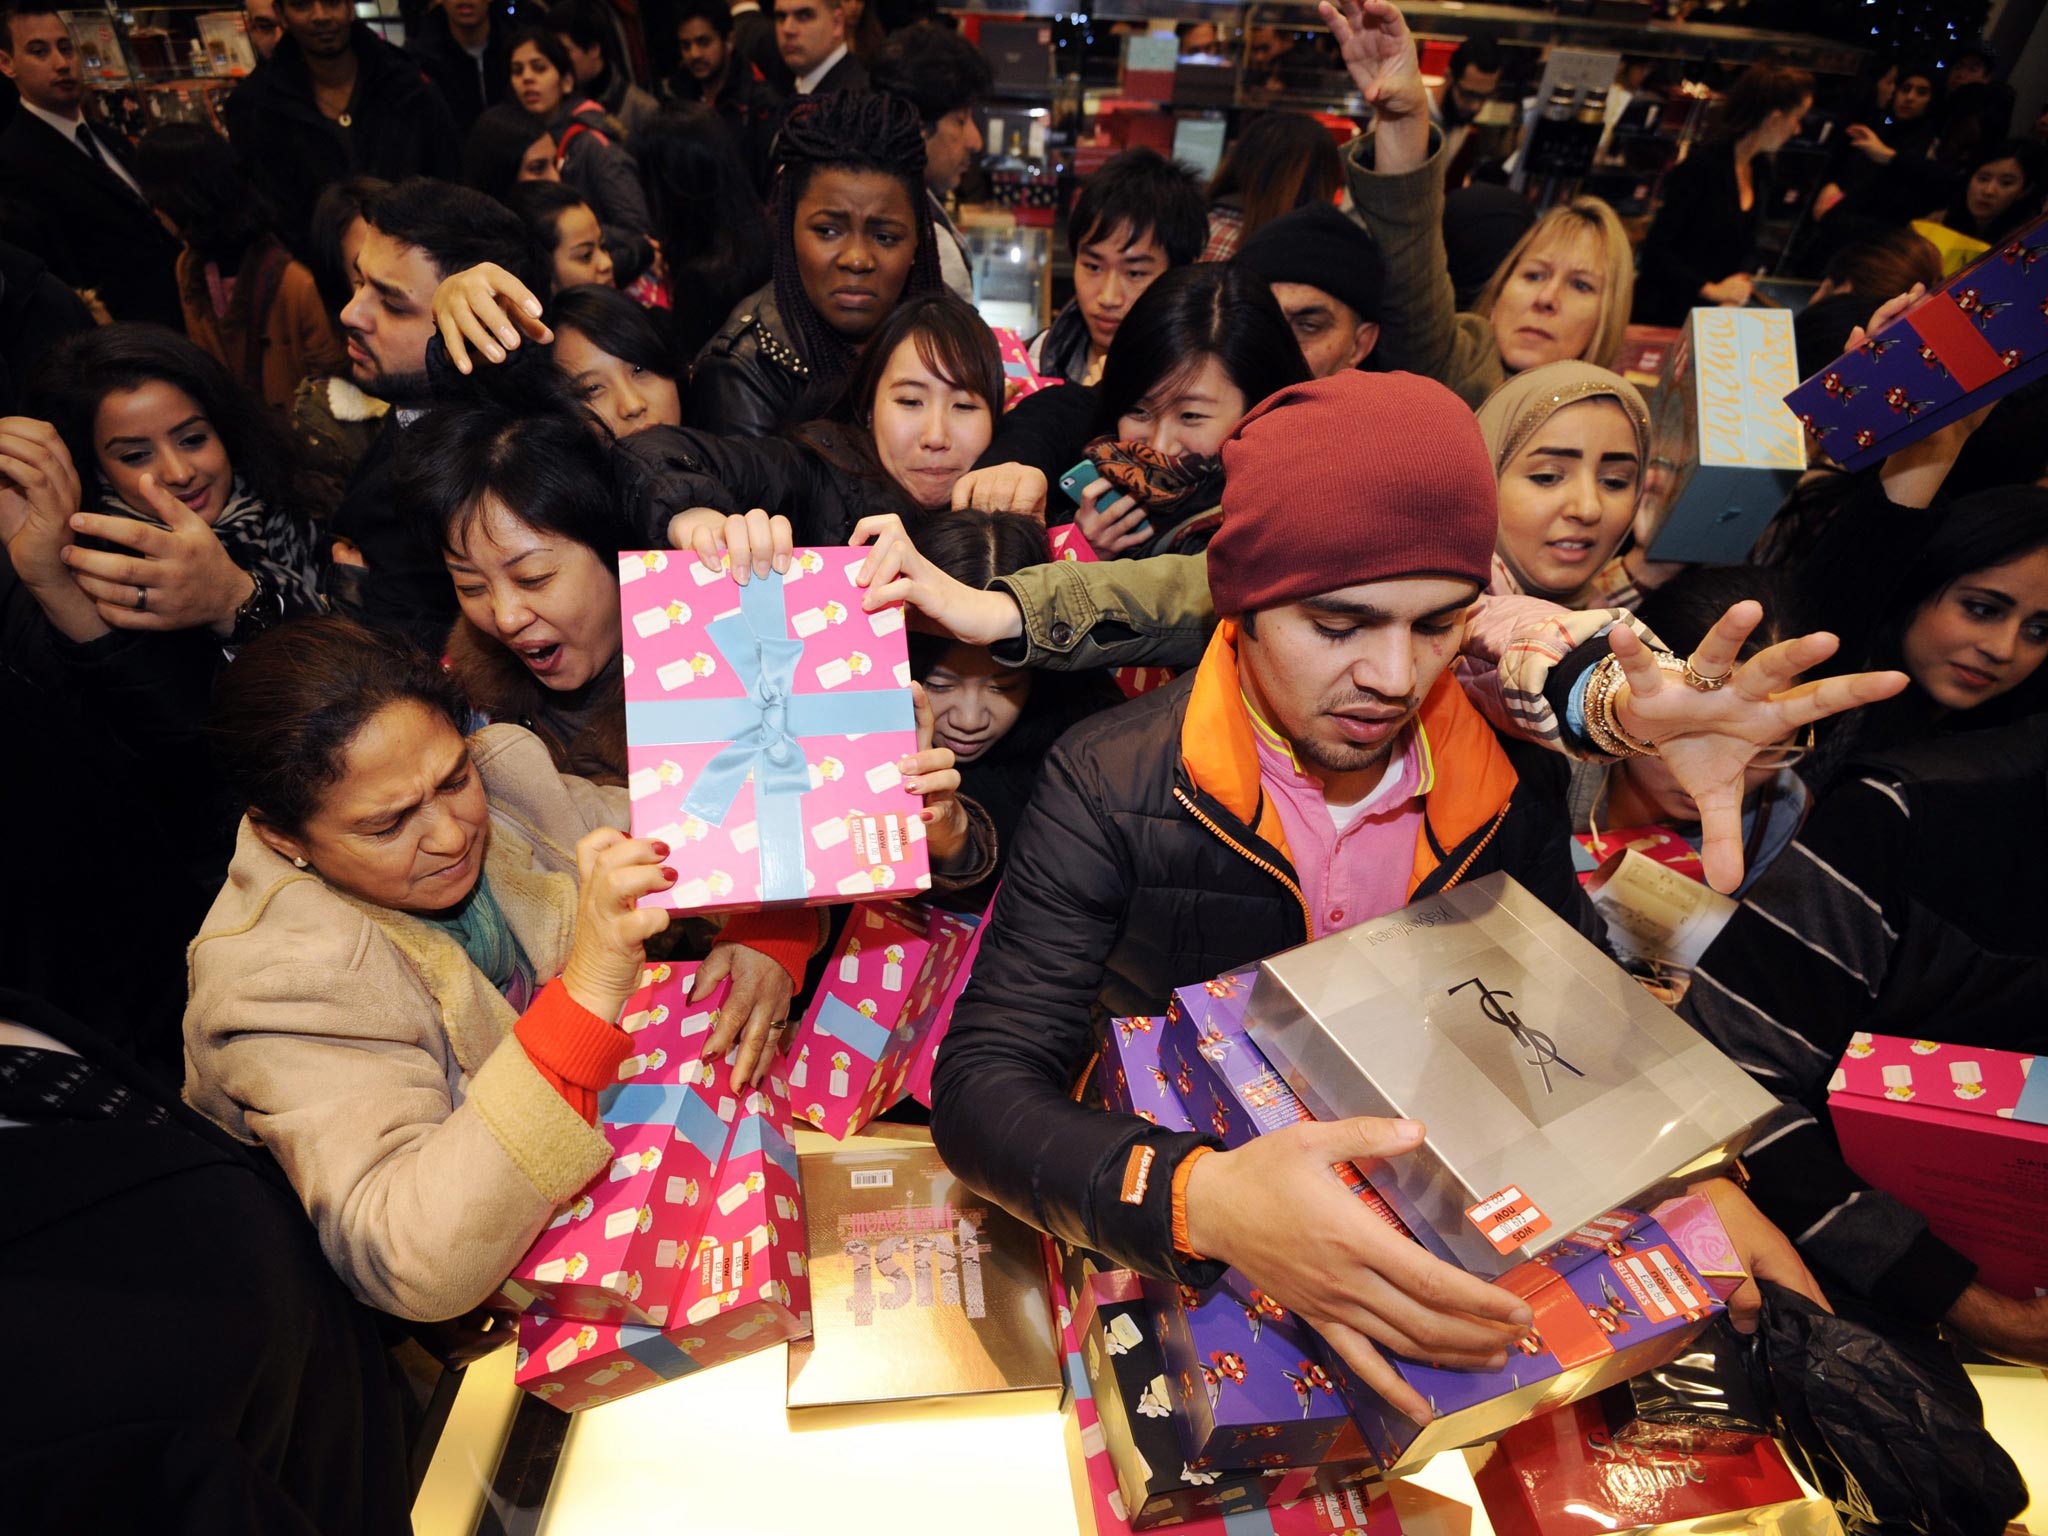 Online shopping ‘comes of age’ in time for Boxing Day as millions make